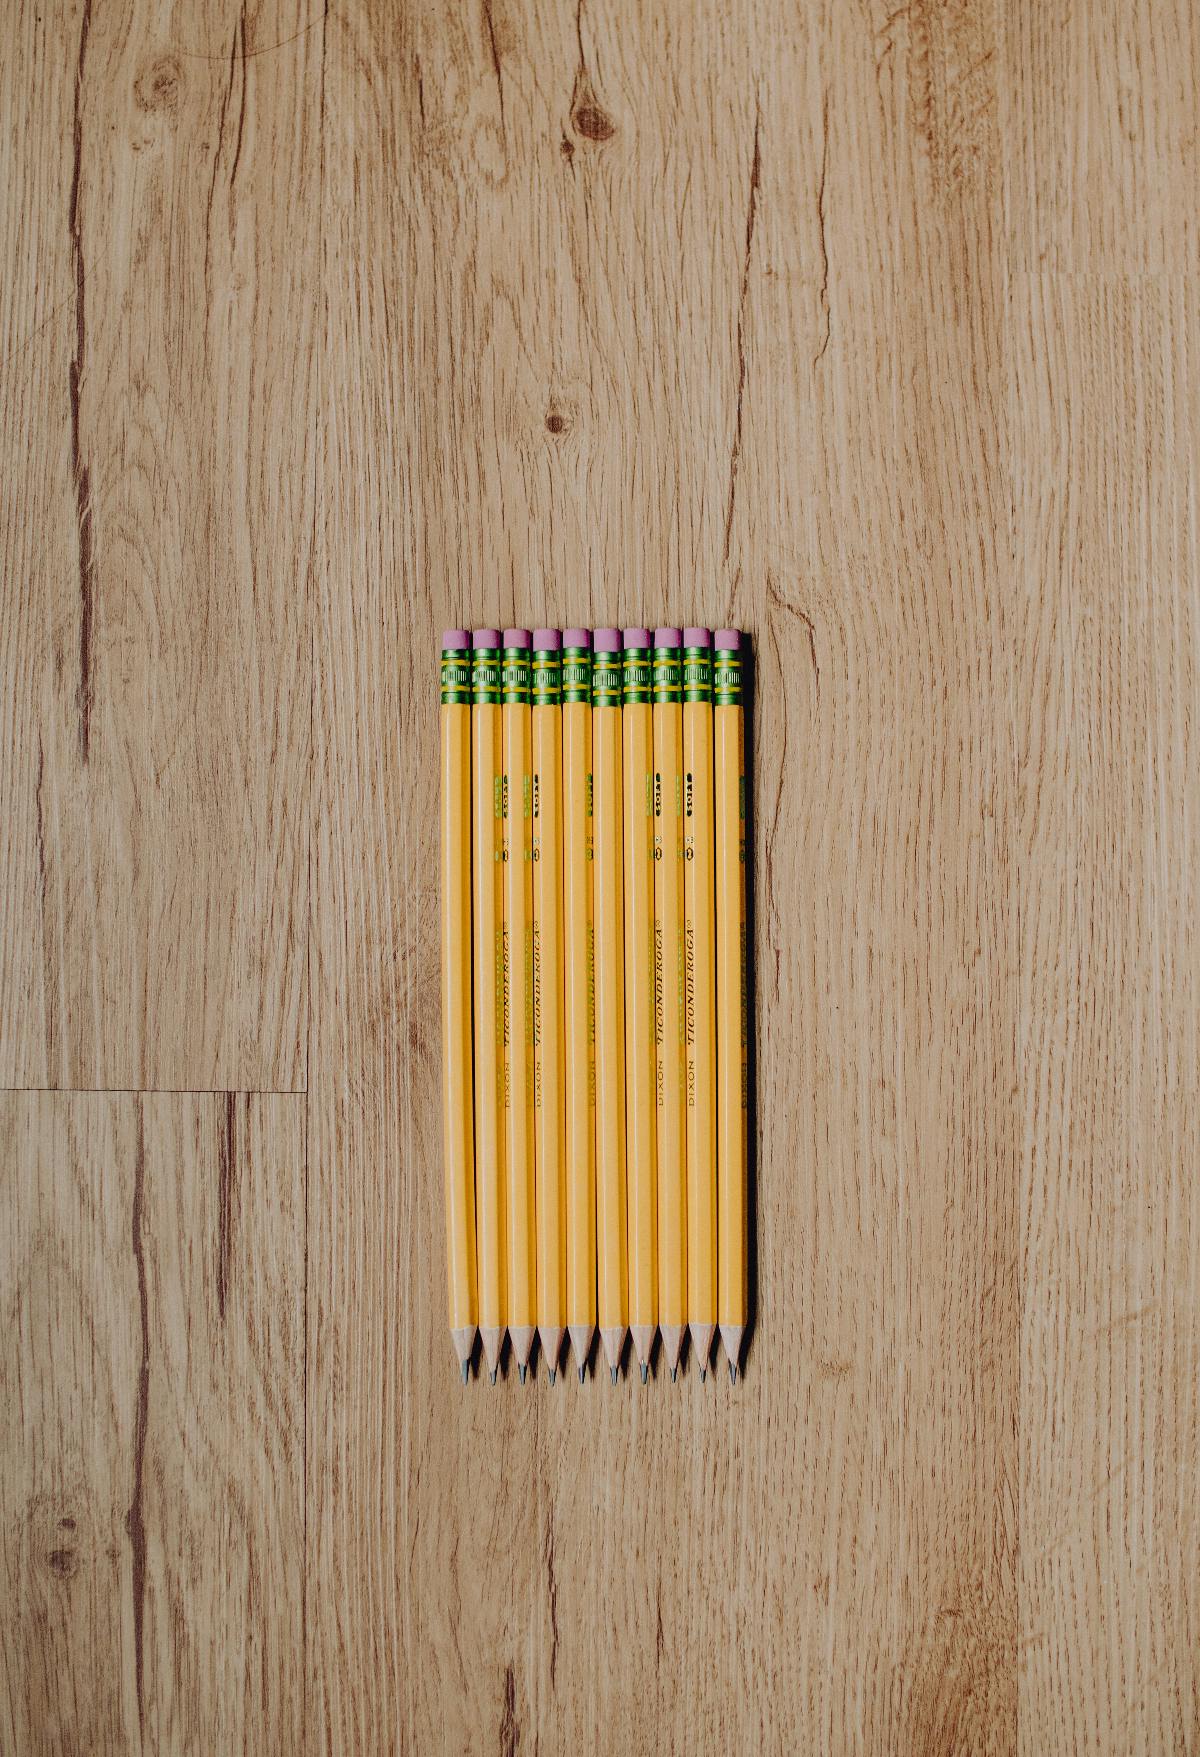 ten neatly lined up number 2 pencils on a wood surface.